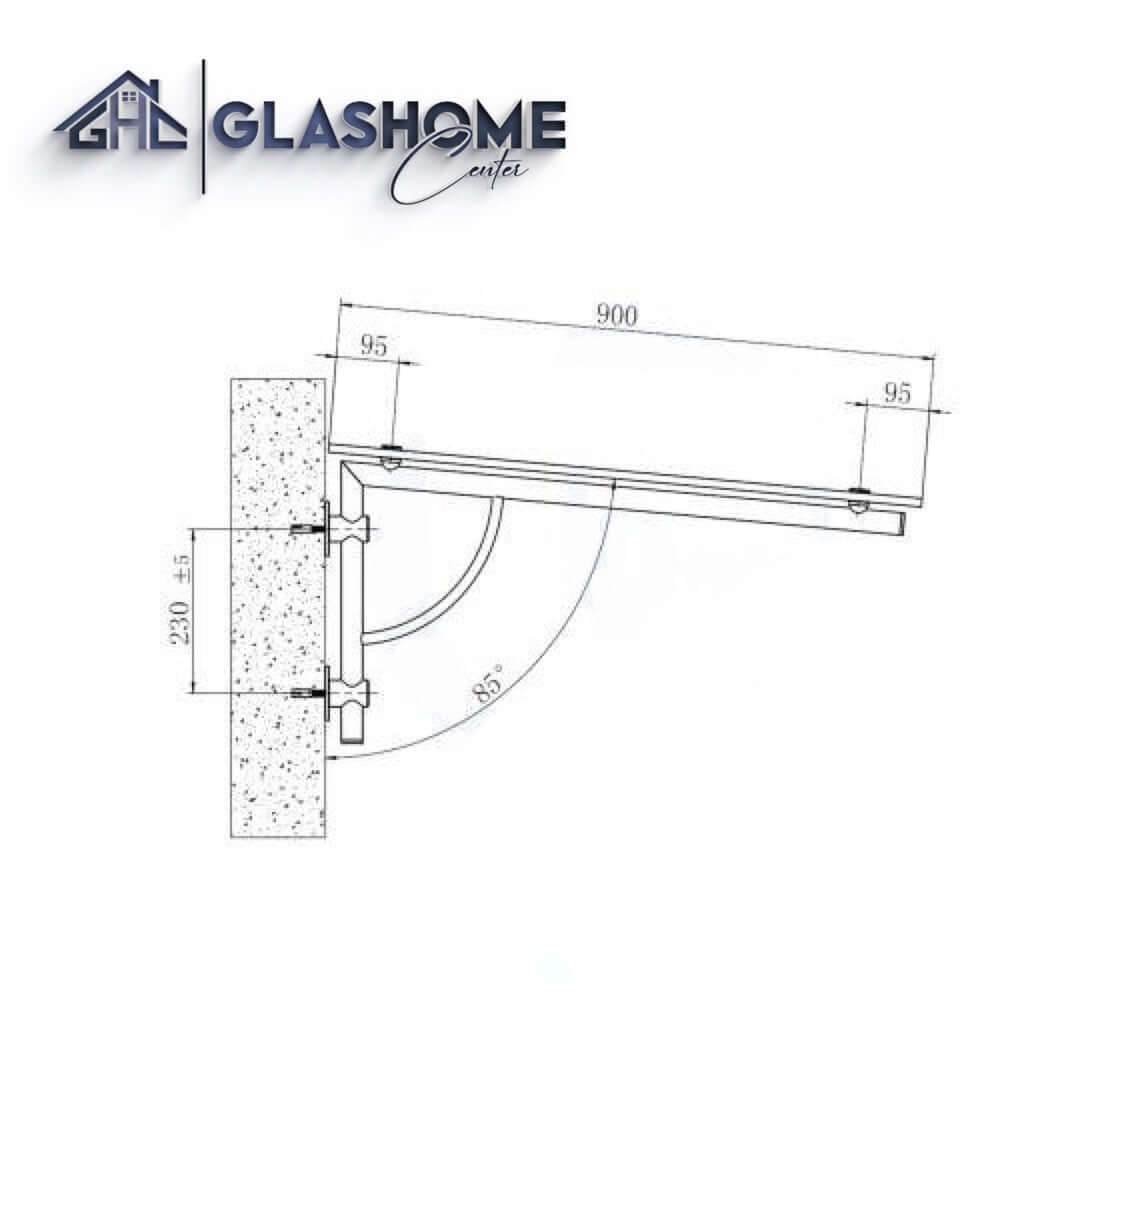 GlasHomeCenter - glass canopy - gray glass - 180x90cm - 13.1mm laminated safety glass - incl. 2 stainless steel brackets variant "Athen"